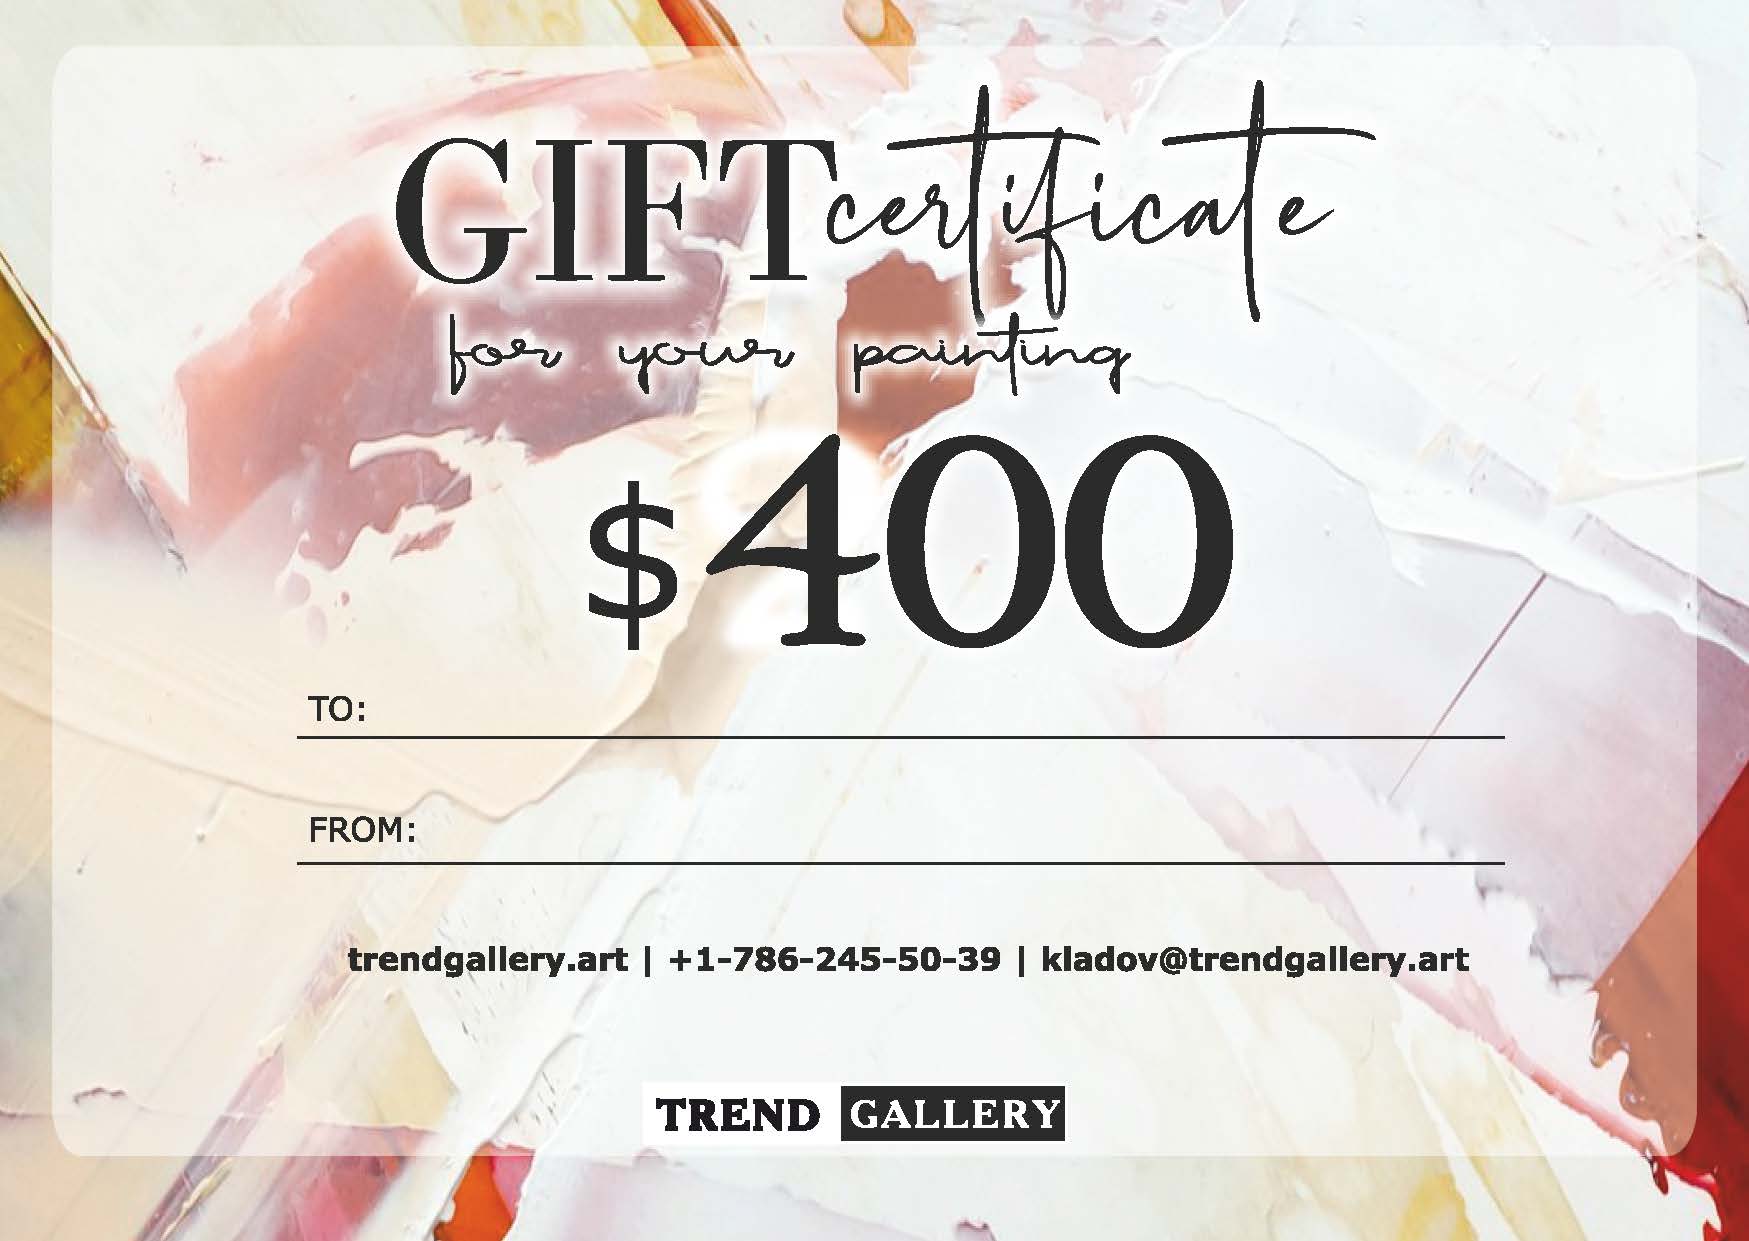 Gift Certificate For Painting Gift Card Best Gift Cards For Women Gift